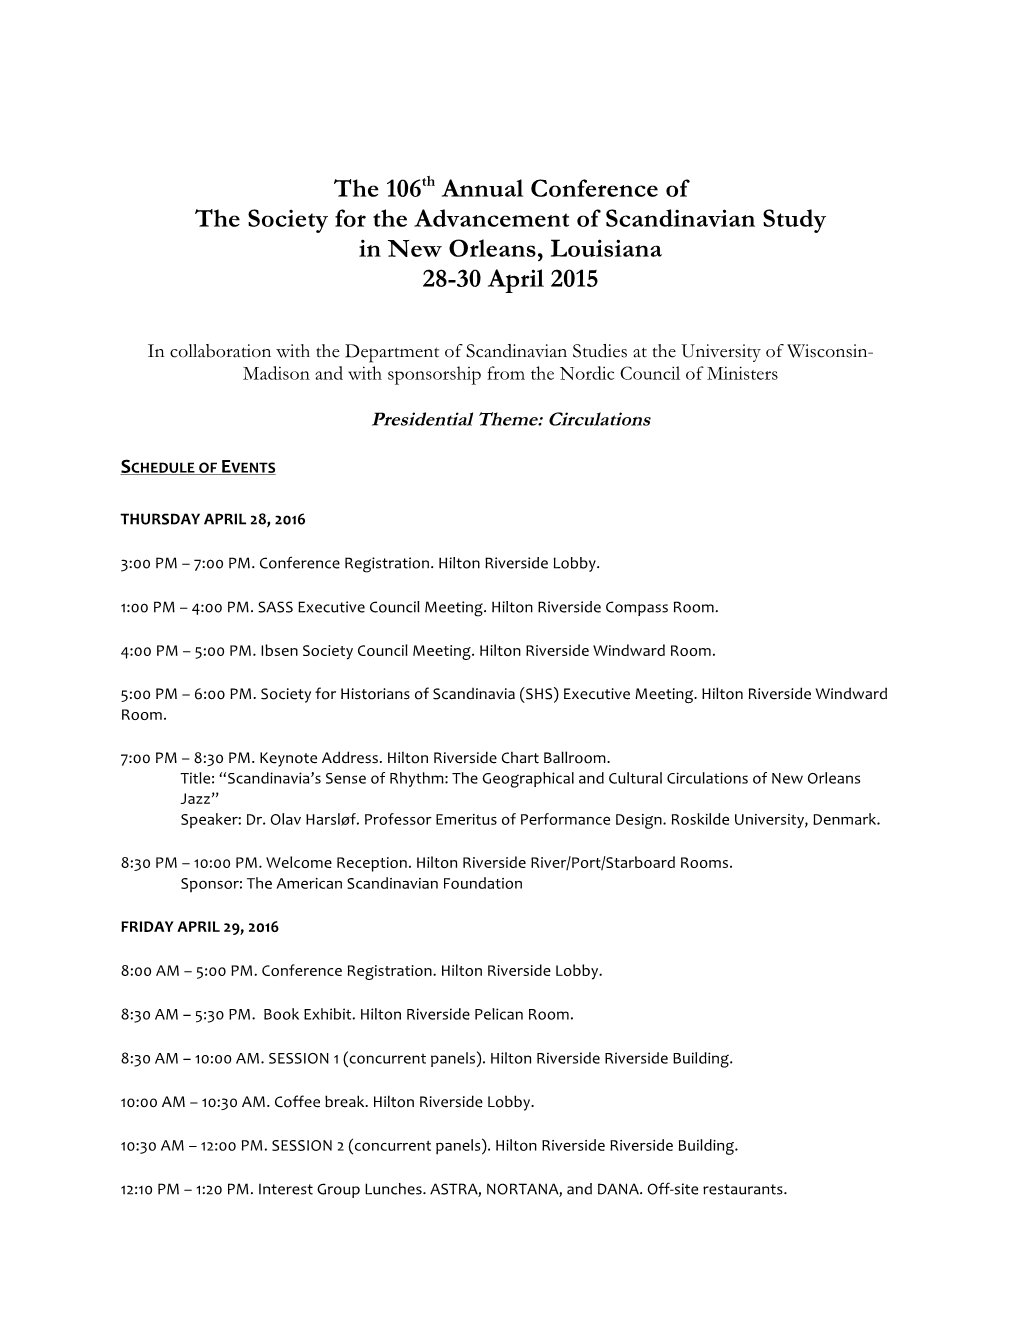 The 106Th Annual Conference of the Society for the Advancement of Scandinavian Study in New Orleans, Louisiana 28-30 April 2015